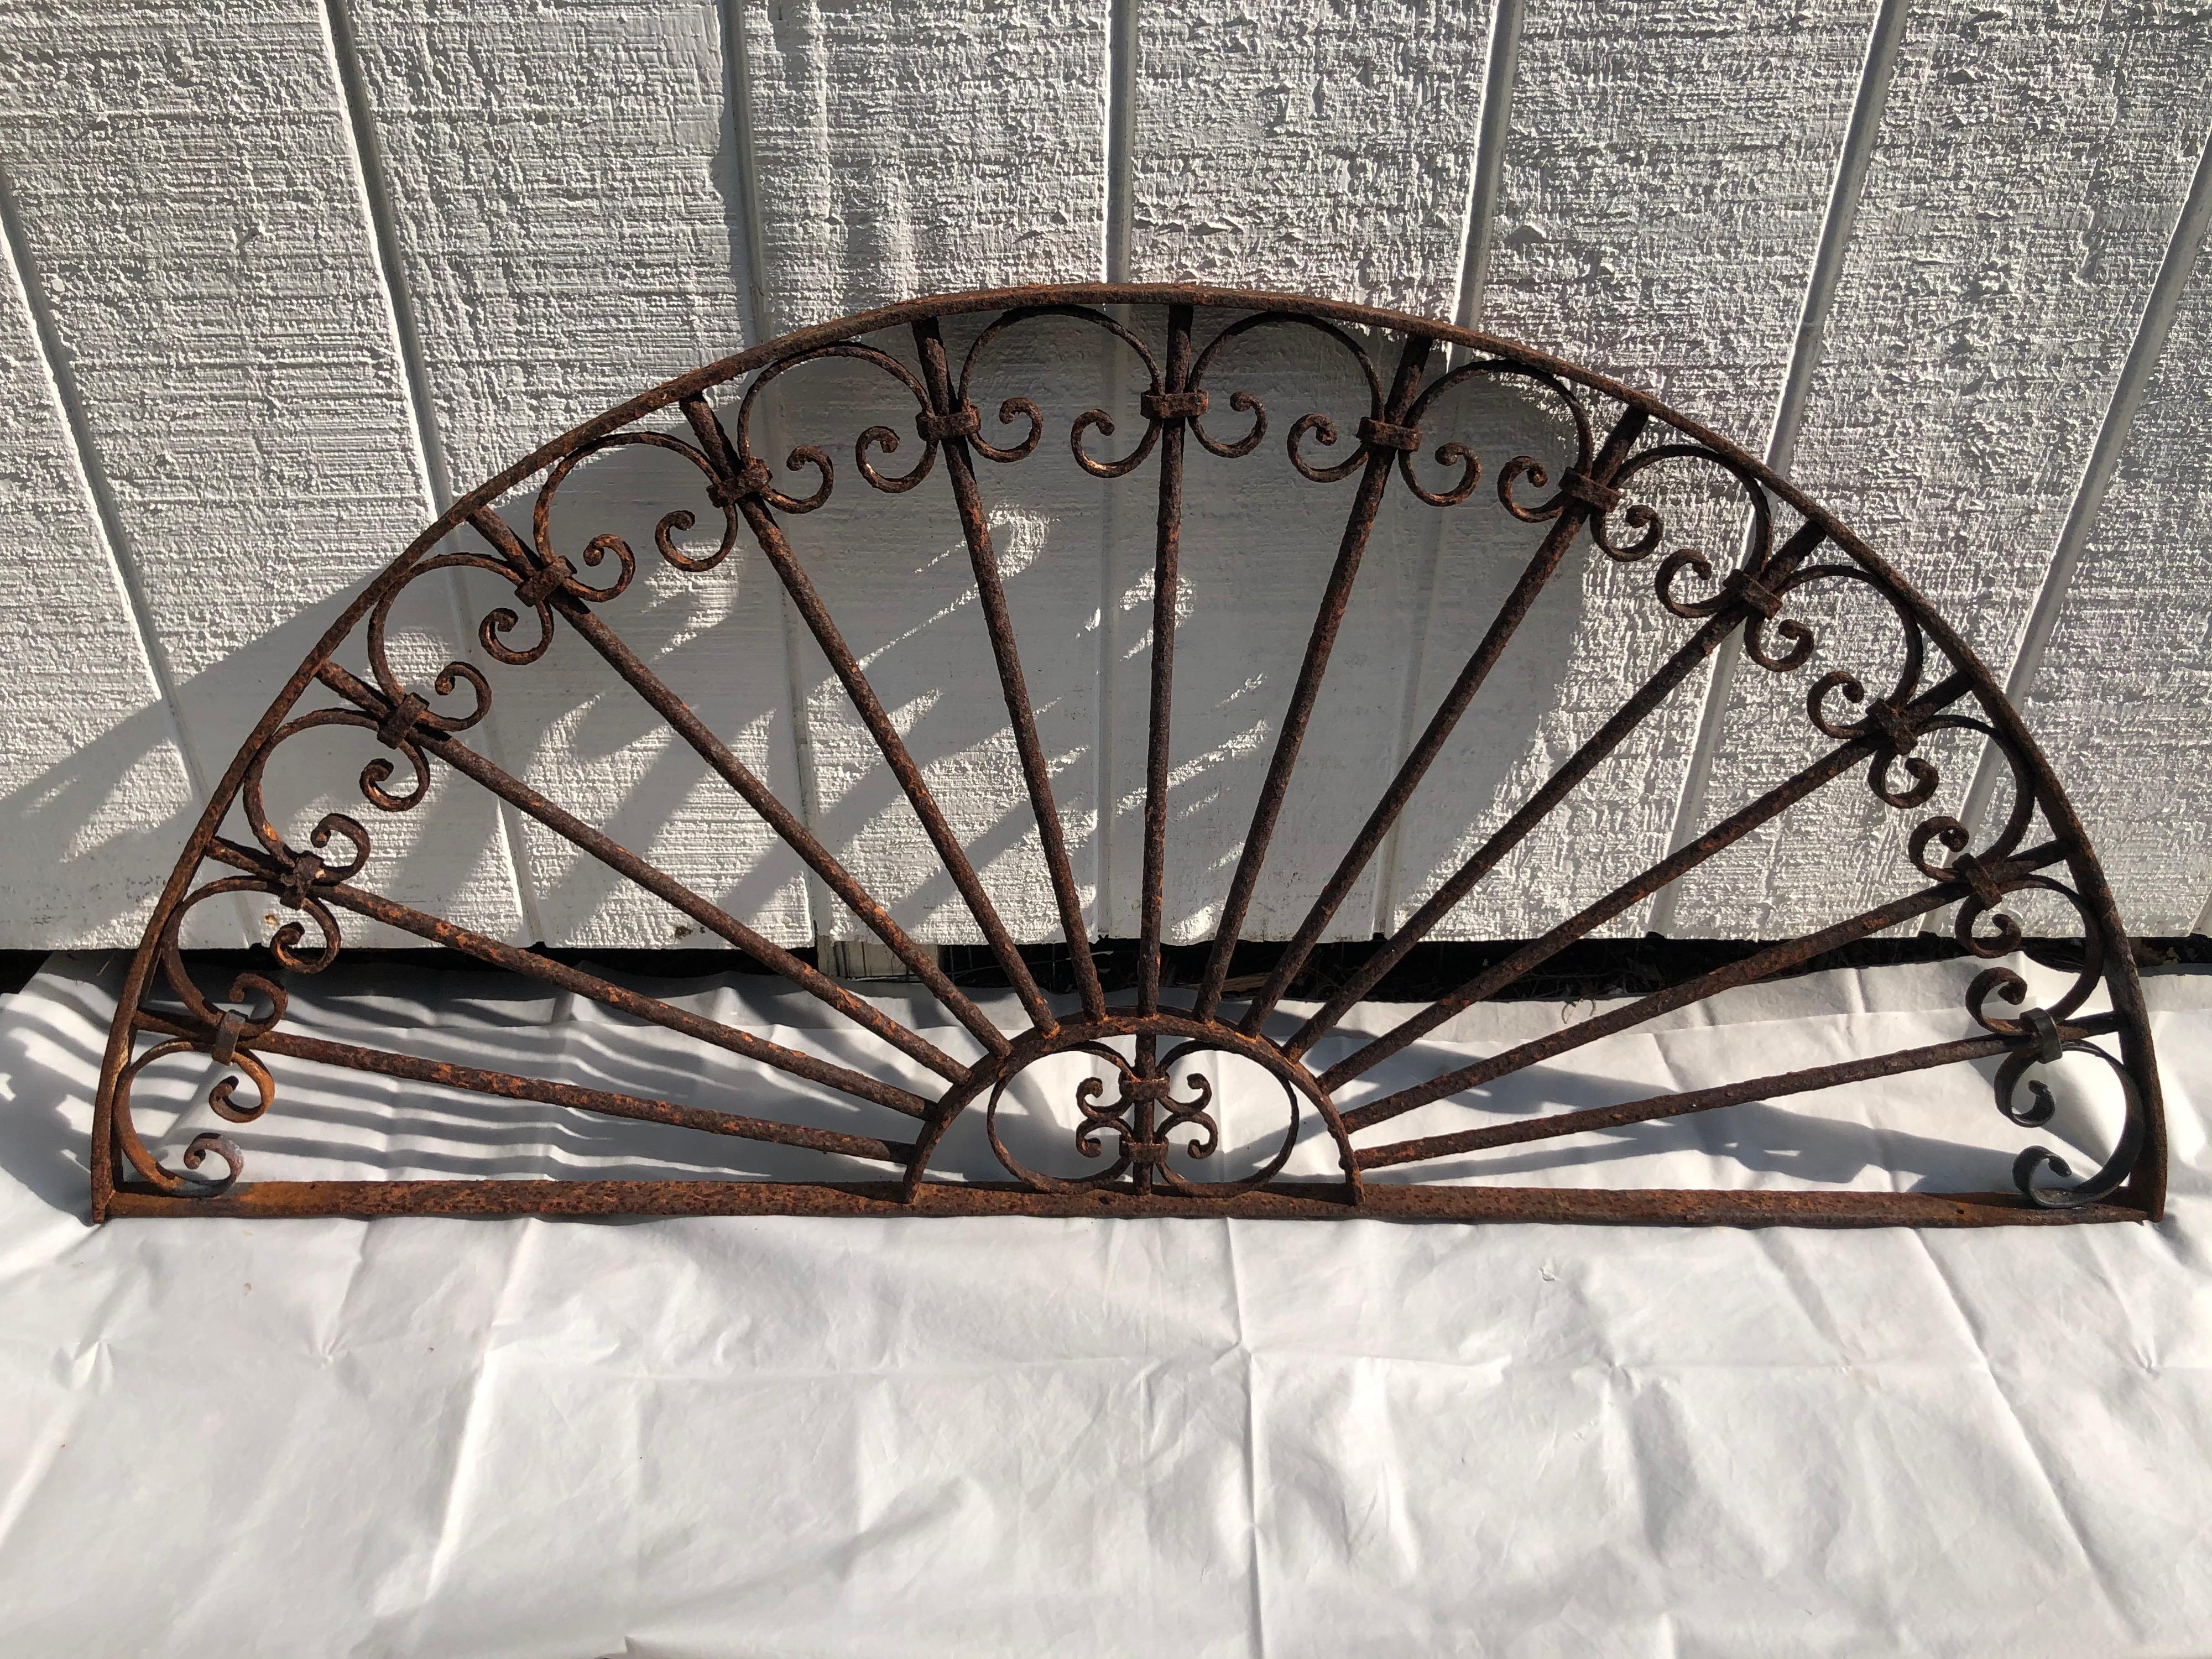 Antique wrought iron decorative Transom or window guard. Lovely half moon shape with detailed scroll work.
Some restoration done to piece. See photos. Perfect ornamentation for above a door or in a garden.
Heavy, solid piece. Some rust due to being